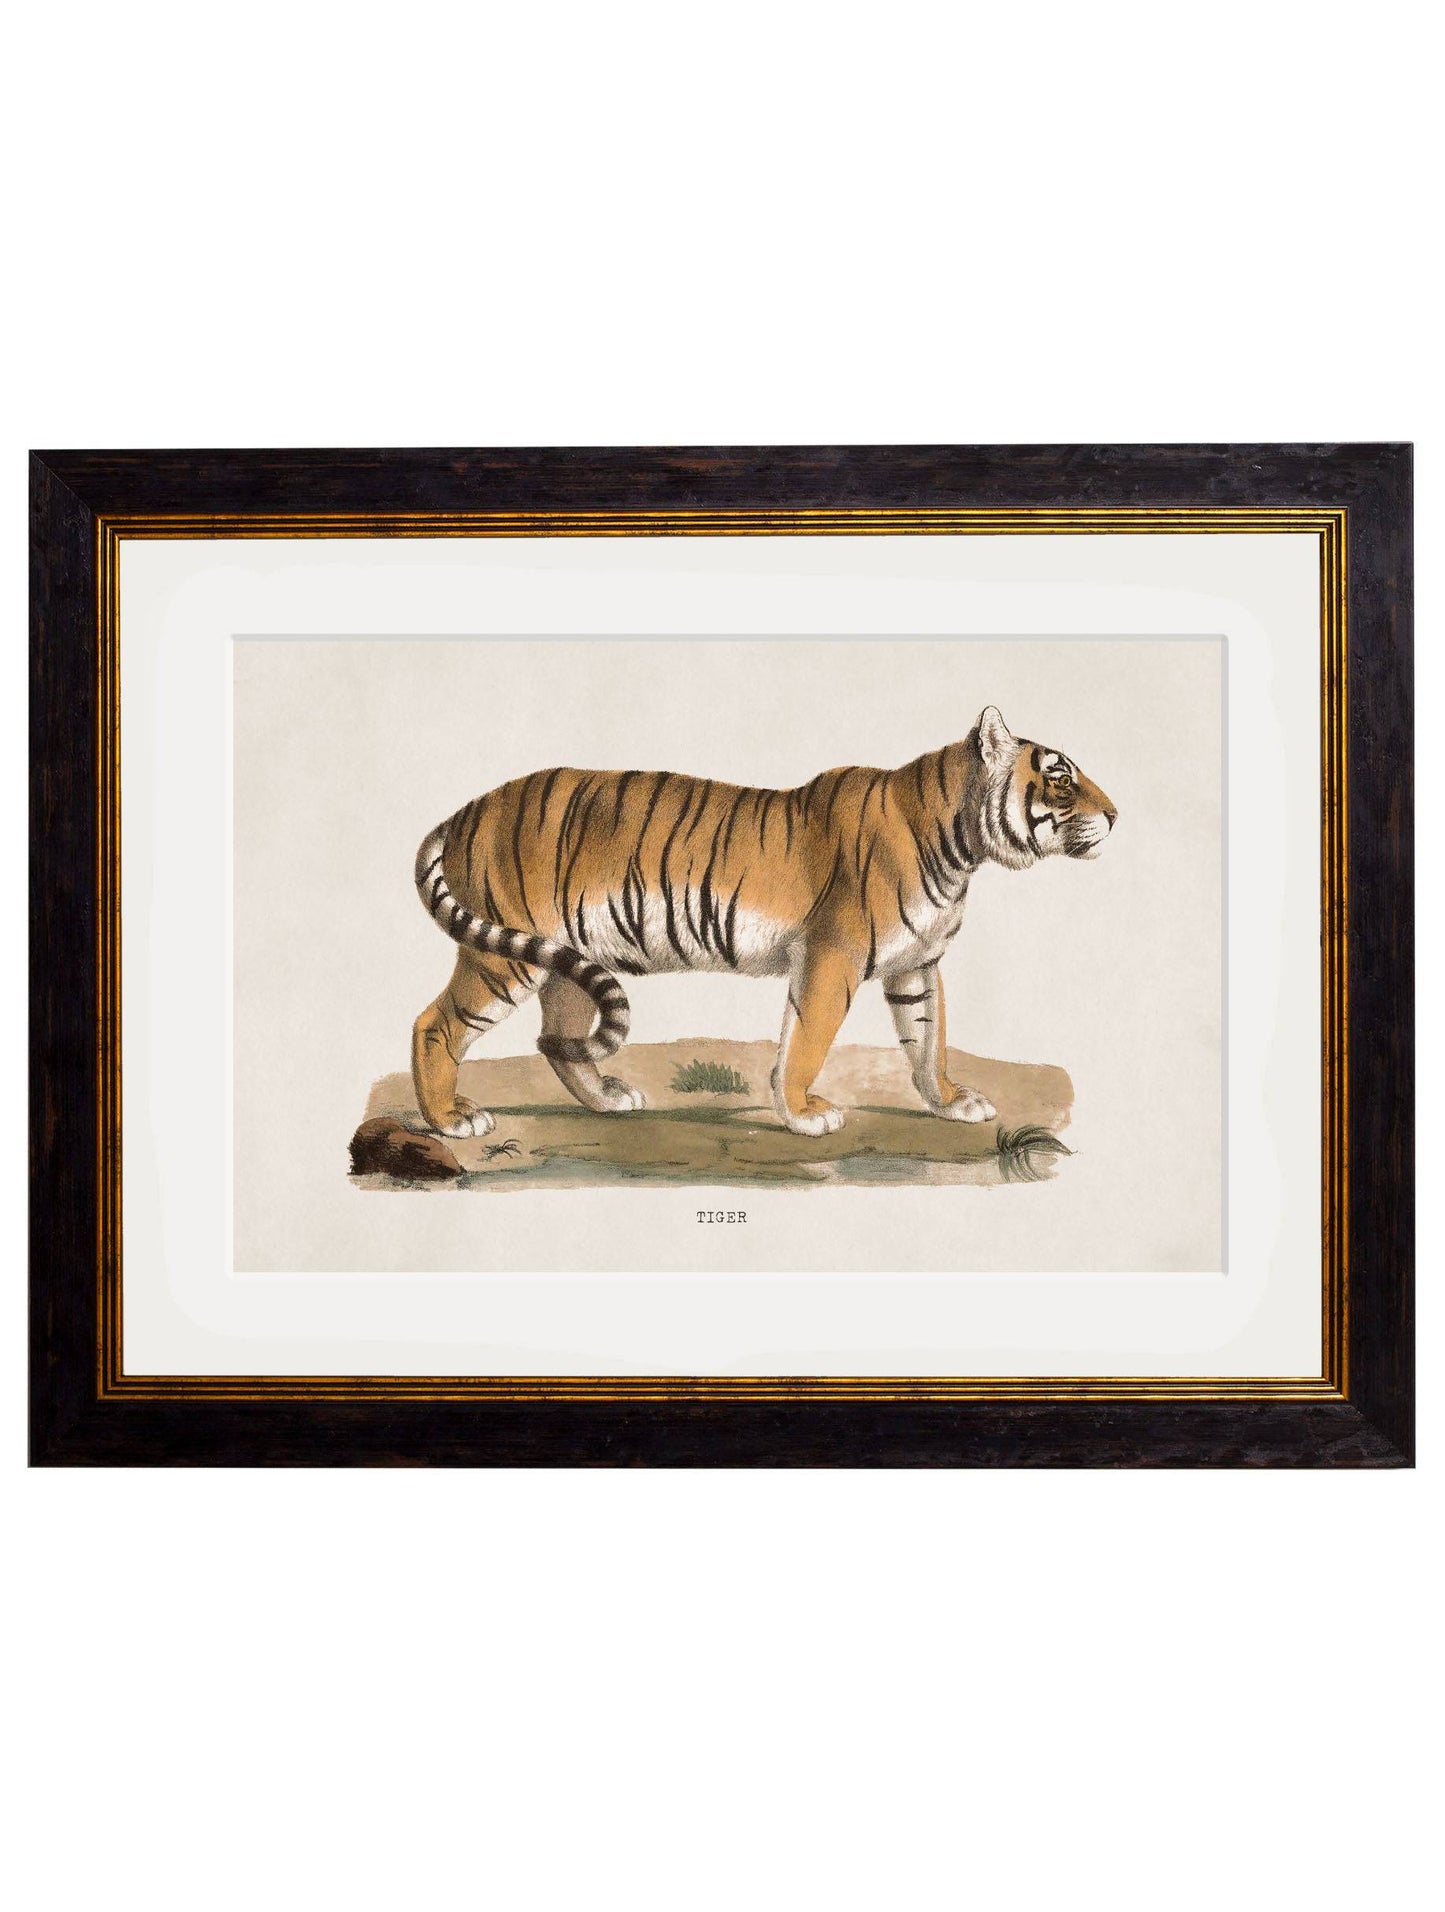 C.1824 Tiger for sale - Woodcock and Cavendish